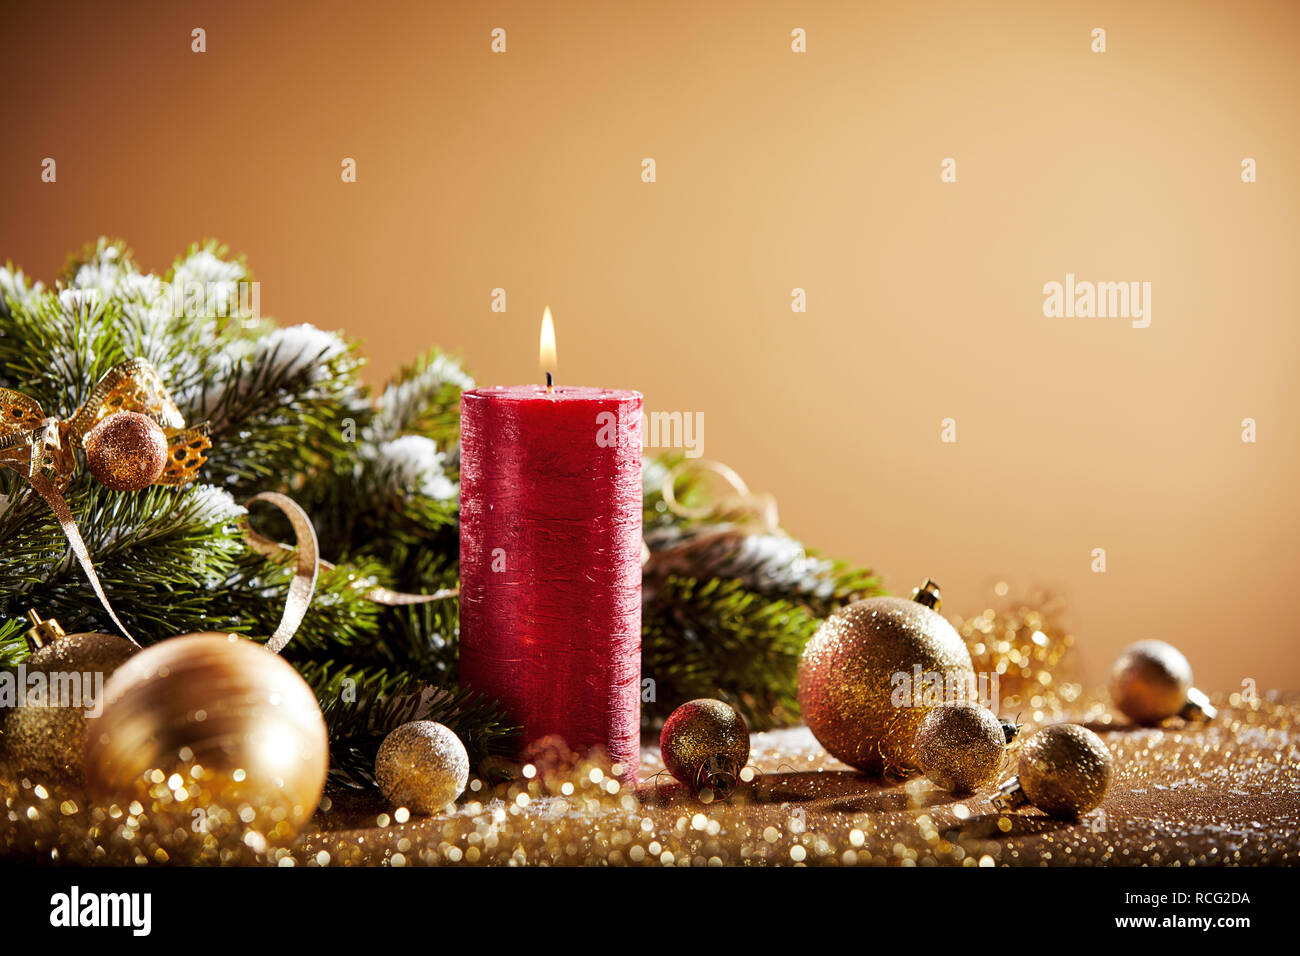 Decorative Christmas background with red candle, golden baubles and fir branches Stock Photo